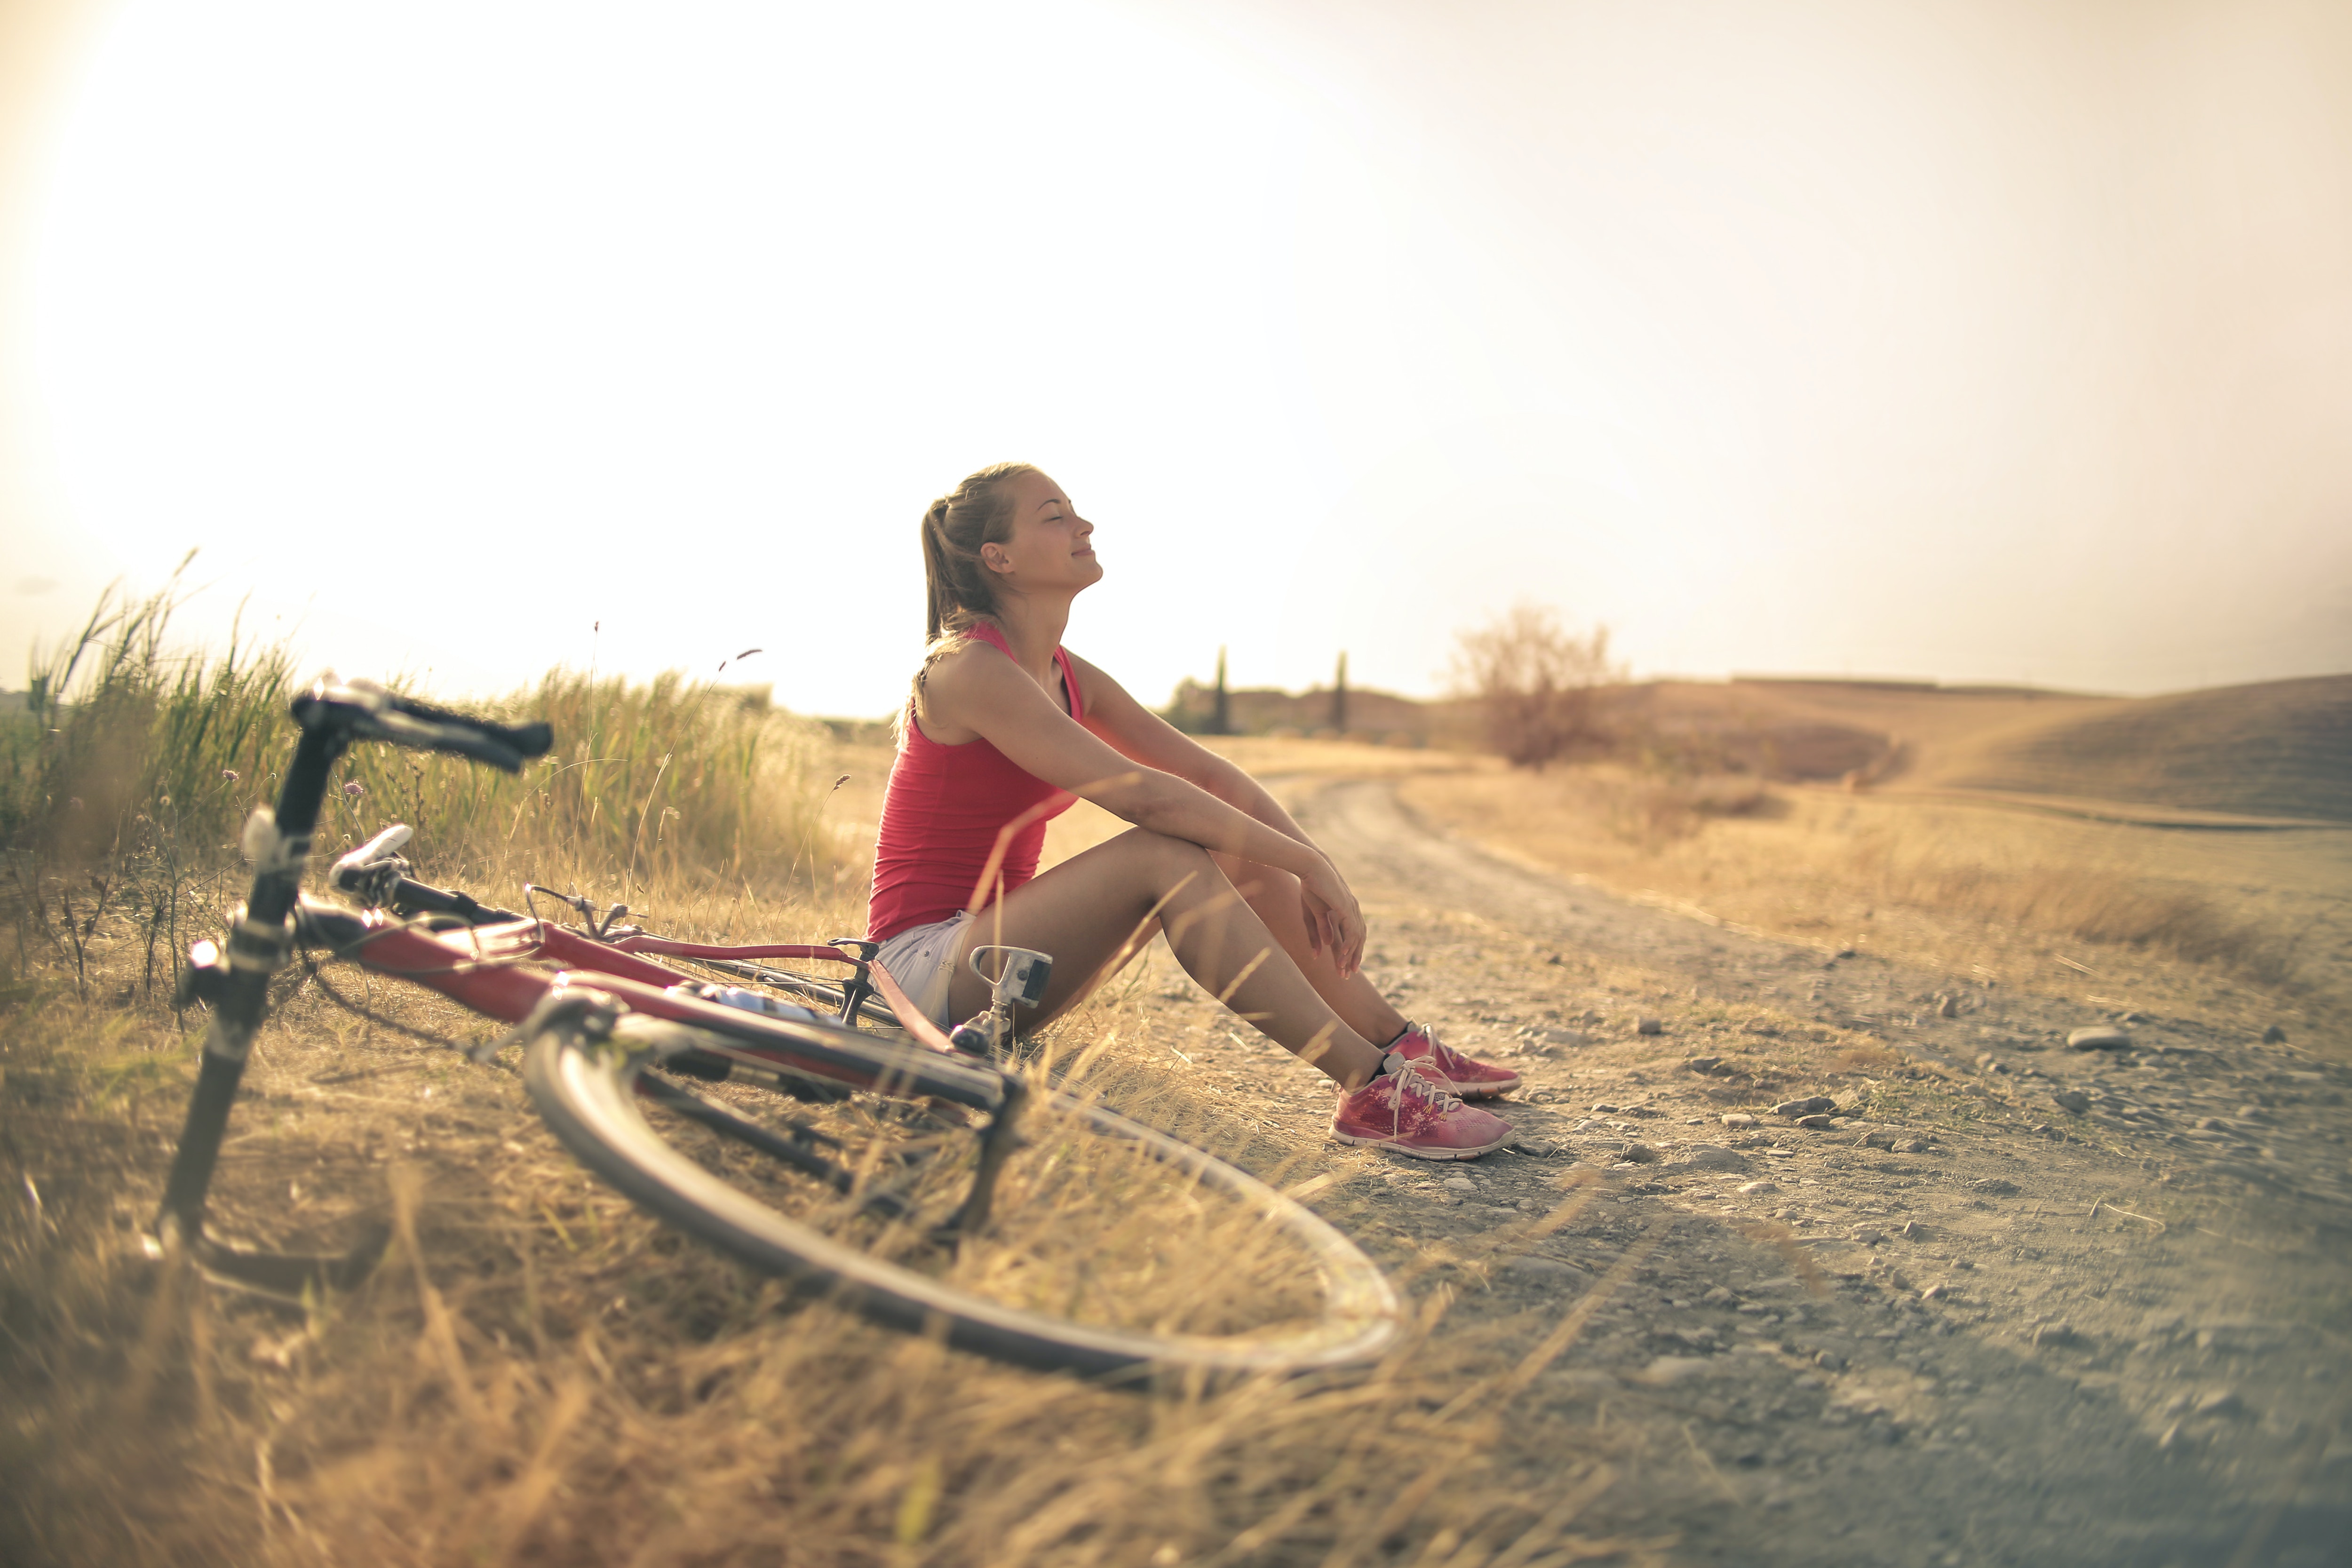 This image is taken in the daytime with the sun shining bright. Women are sitting on the ground after a long bicycle ride. She is wearing a red sports top and shorts, while her bicycle is on the ground next to where she is sitting.